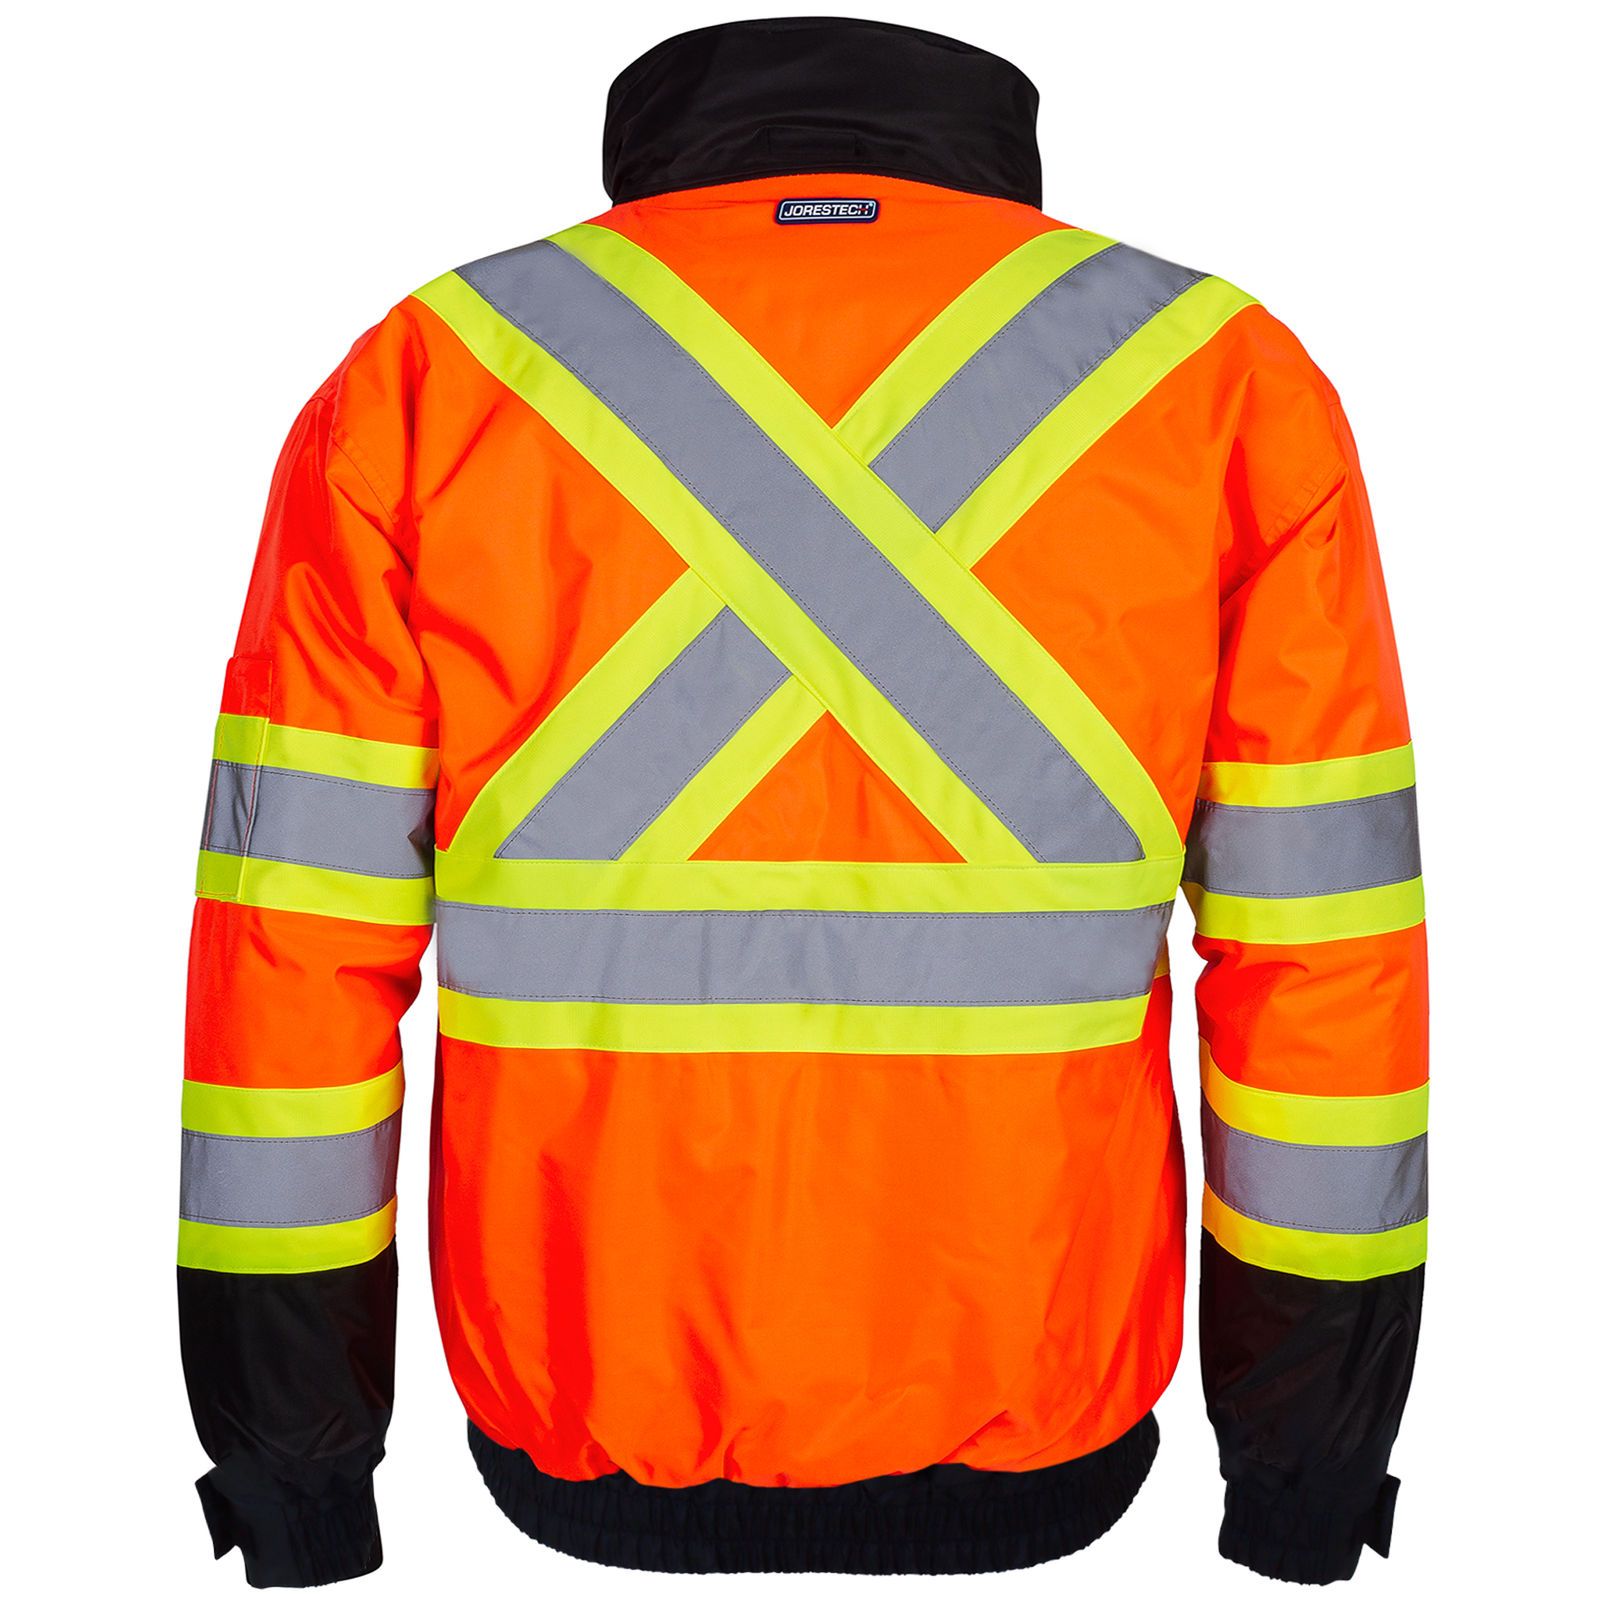 Hi-vis ANSI safety bomber jacket for winter with reflective stripes and a reflective X on the back